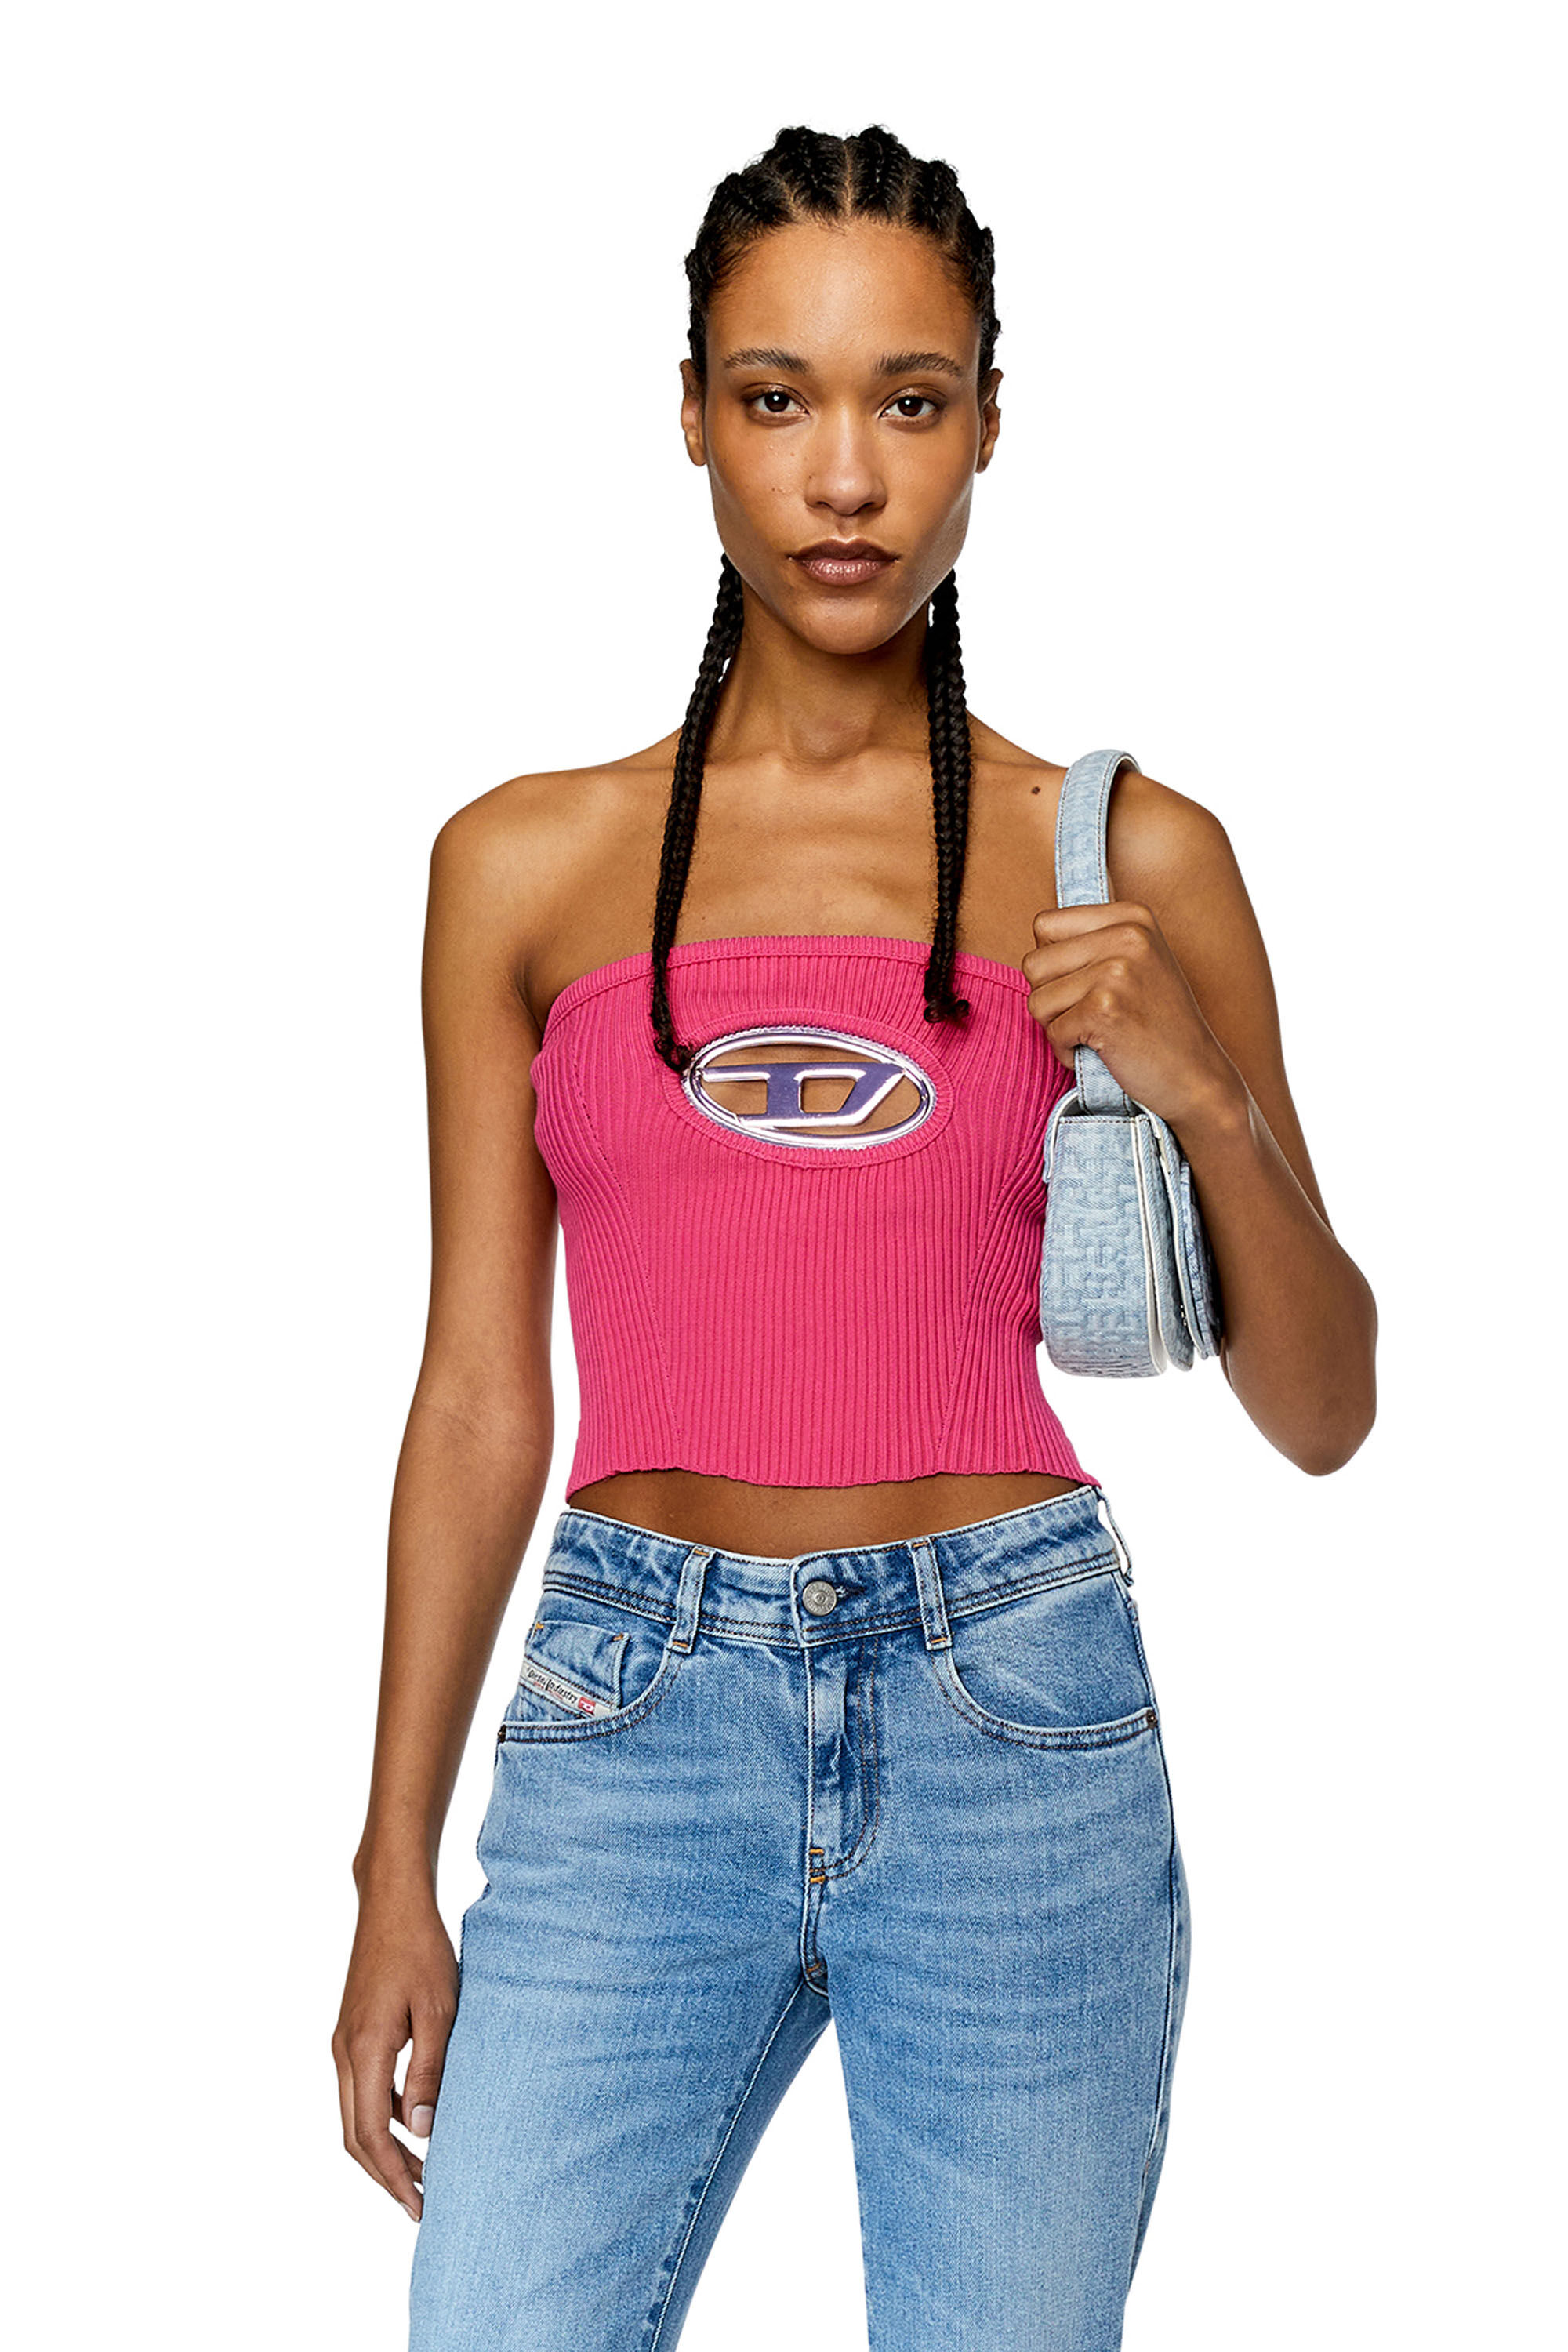 Diesel - M-CLARKSVILLE-B, Woman Bandeau top with oval D plaque in Pink - Image 3